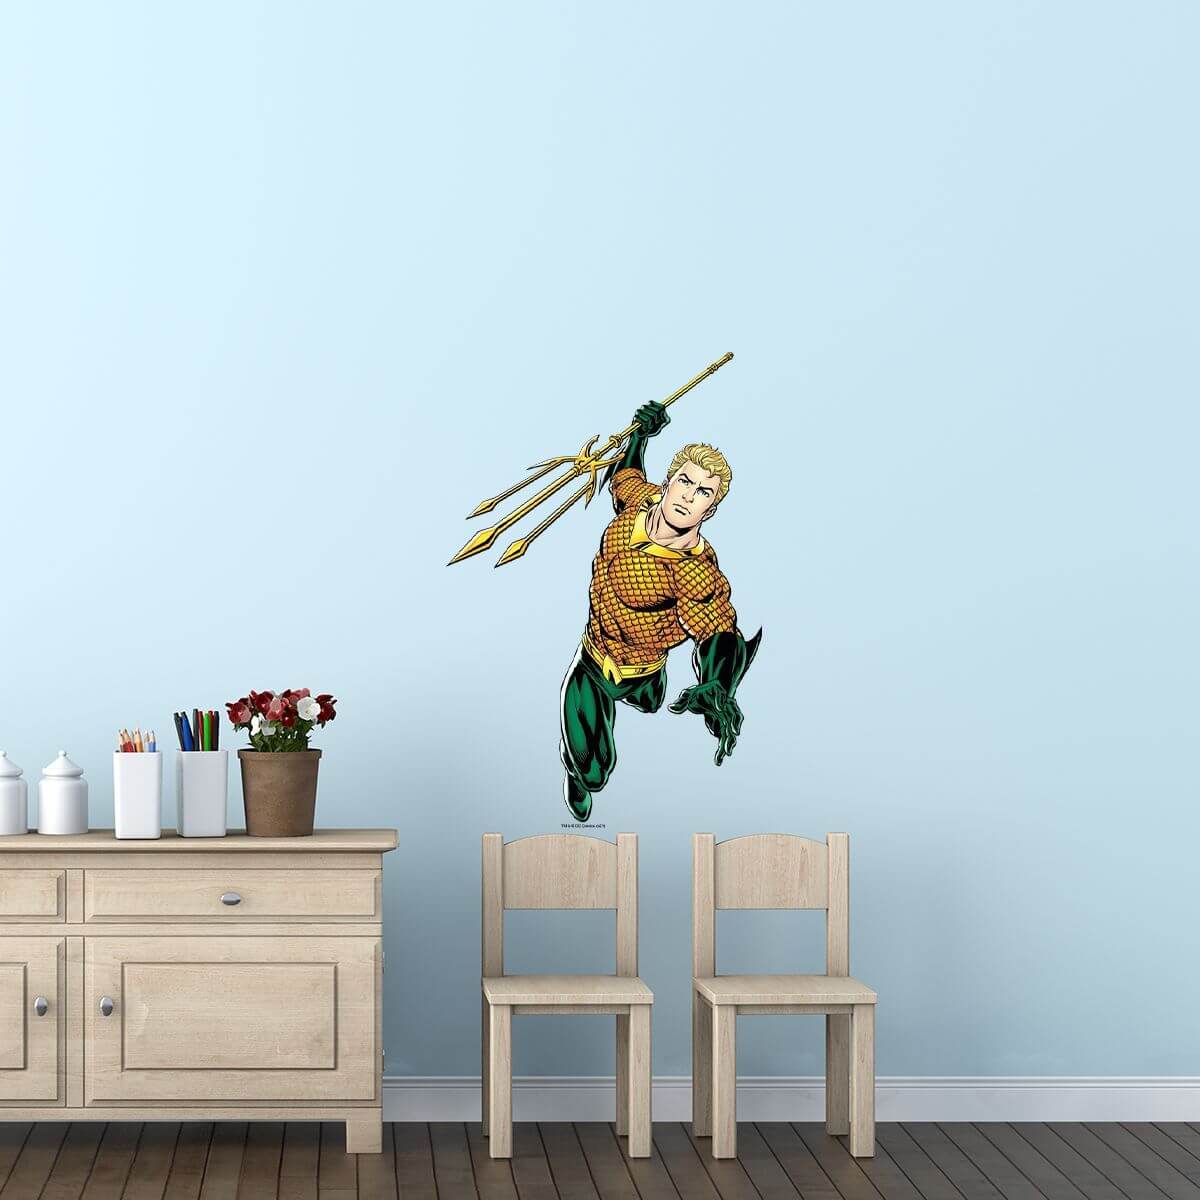 Kismet Decals Aquaman Trident Attack Licensed Wall Sticker - Easy DIY Justice League Home & Room Decor Wall Art - Kismet Decals